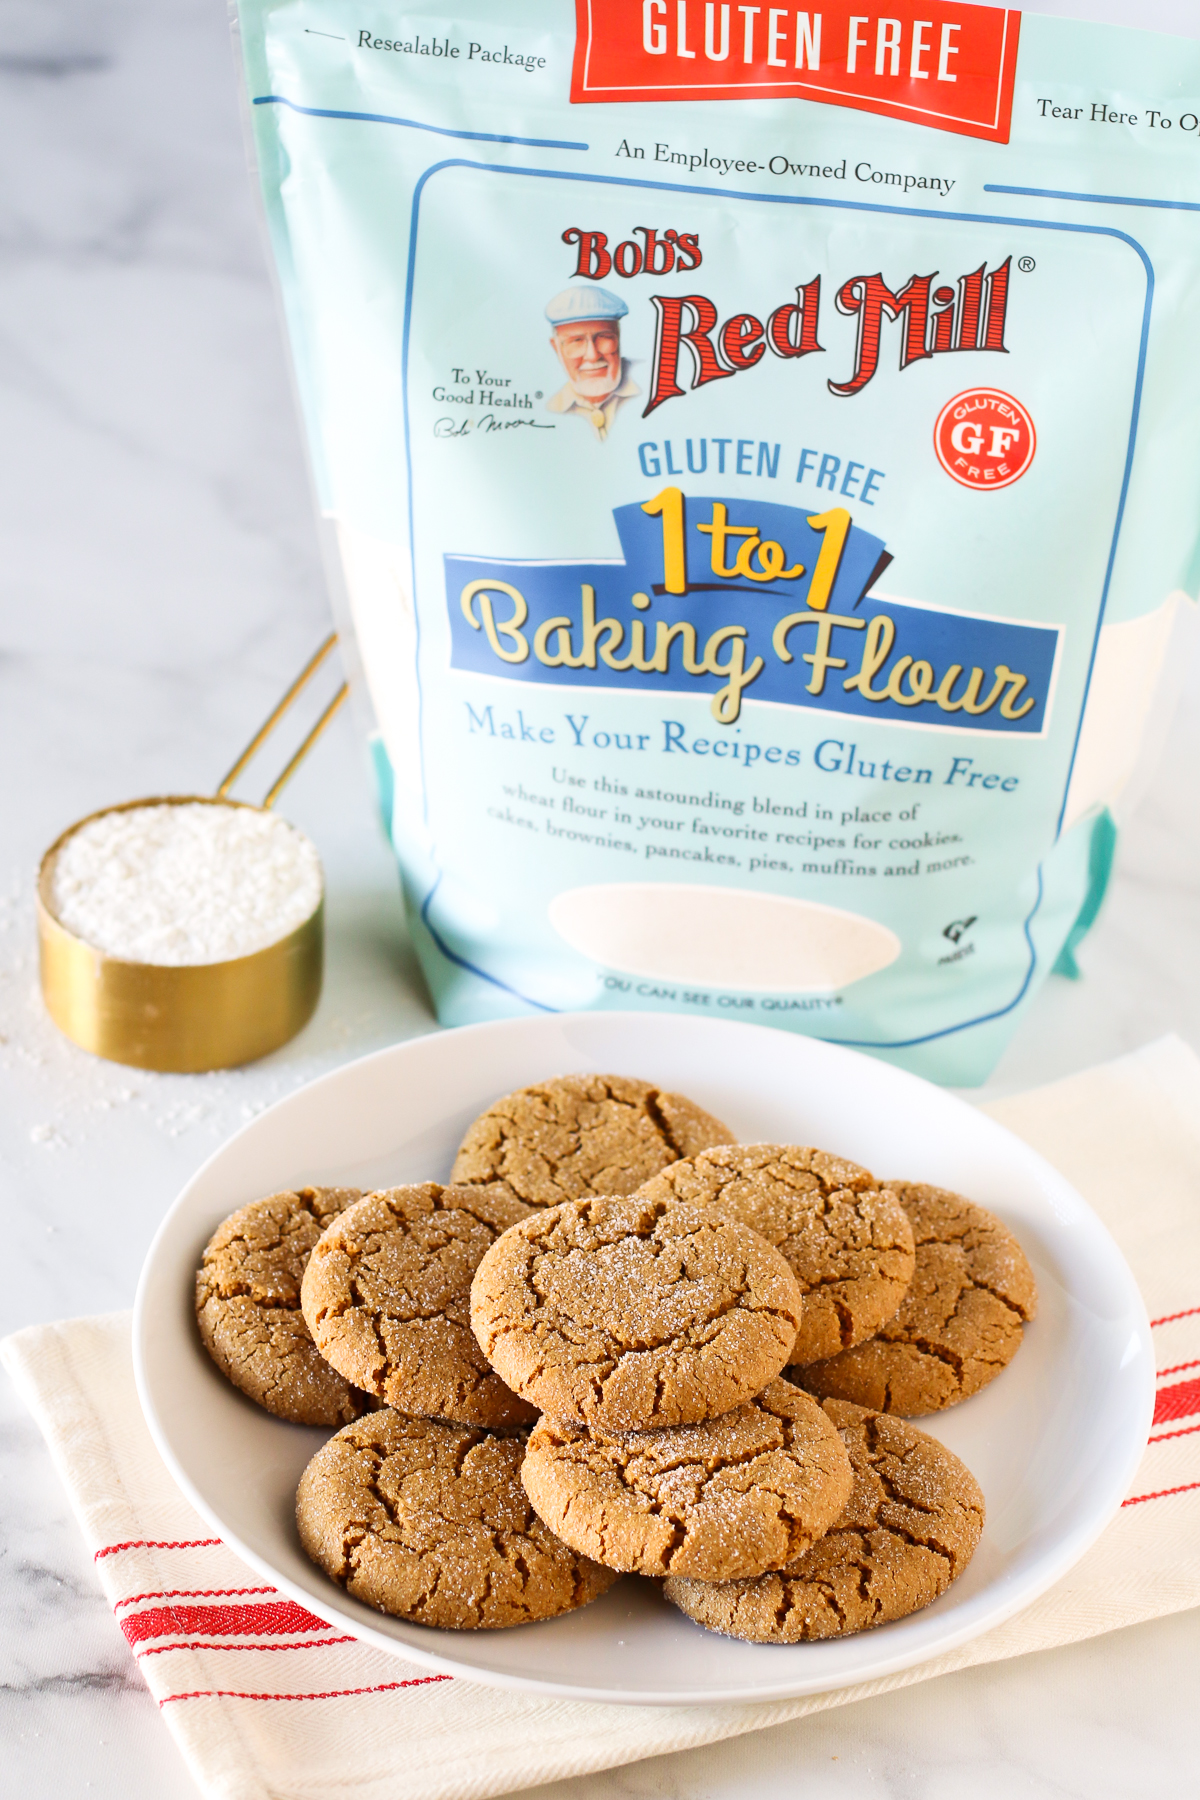 Gluten Free Vegan Molasses Cookies. Made with Bob’s Red Mill gluten free 1-to-1 baking flour, these cookies are soft, chewy and perfectly spiced.